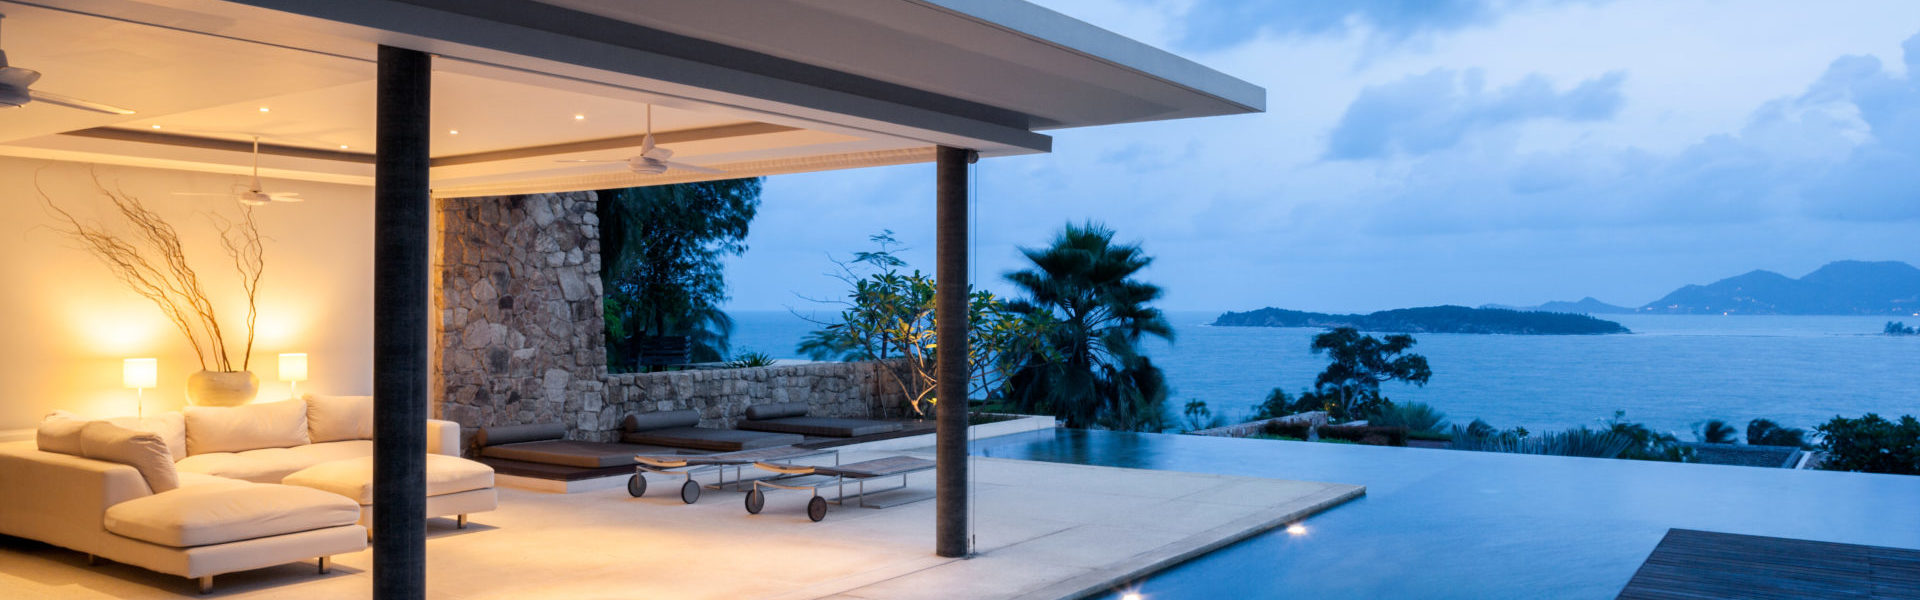 High value home insurance, villa patio scene next to infinity pool at dusk overlooking blue sea with islands in background.